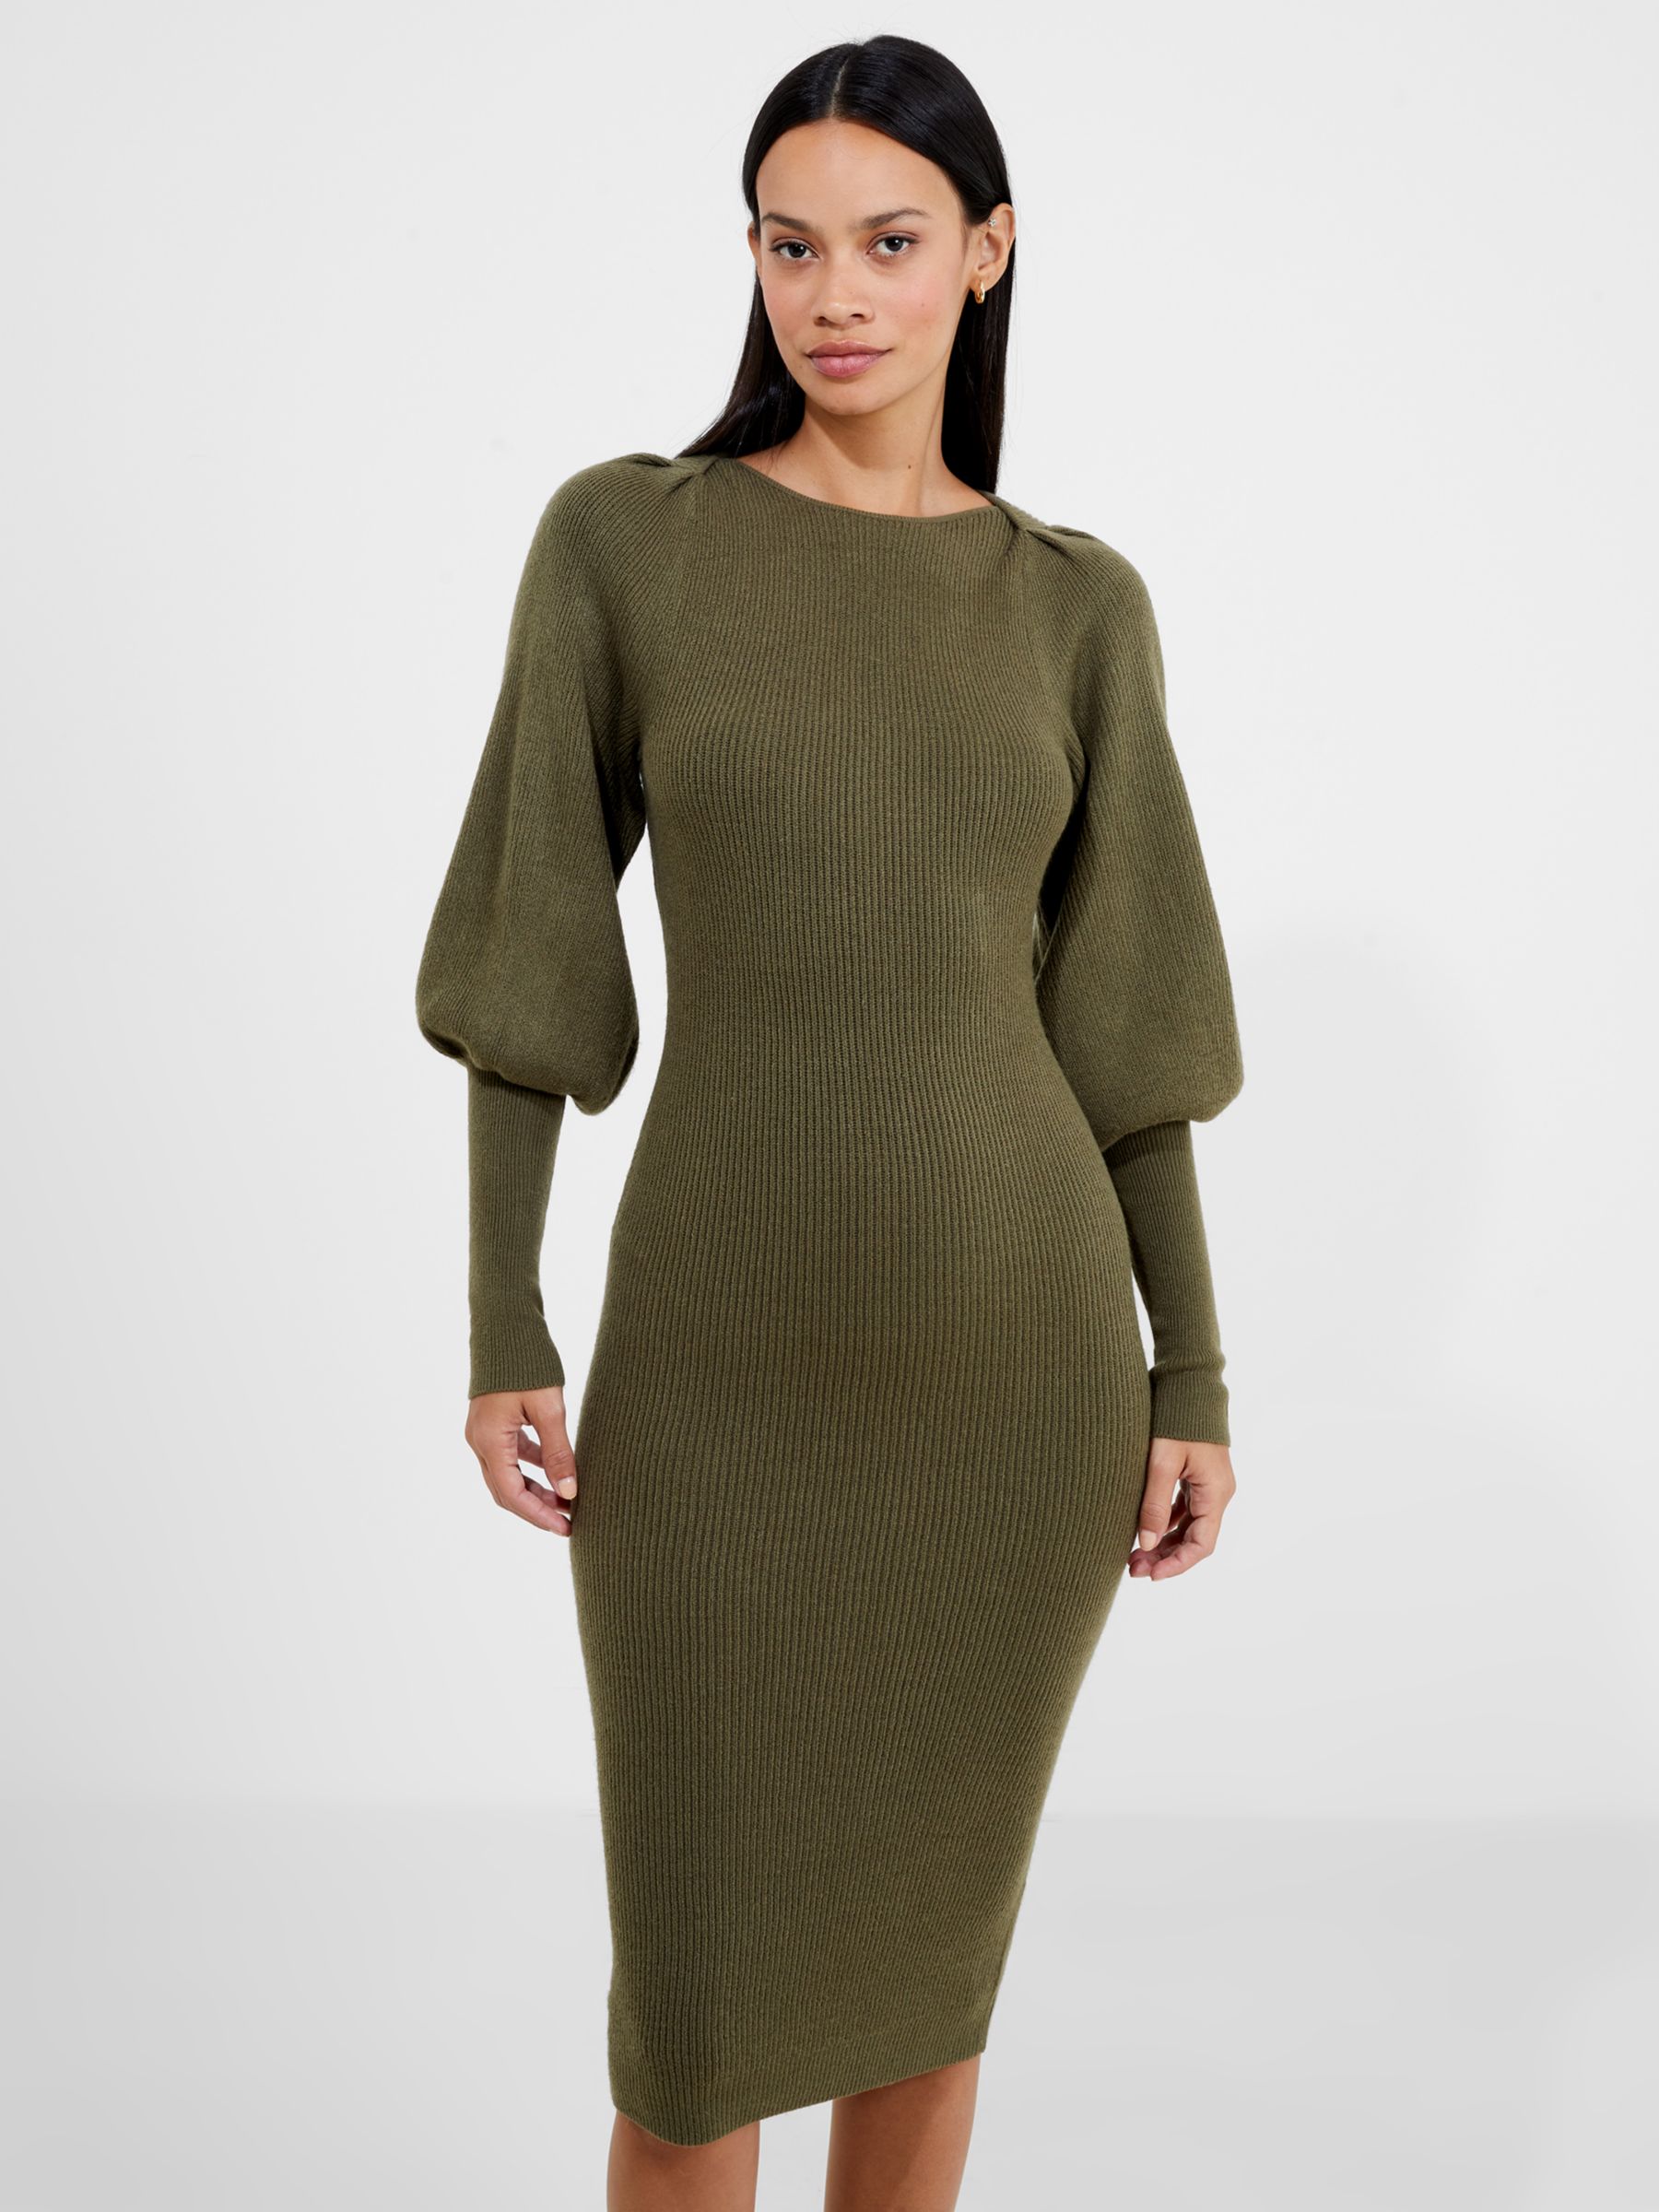 Buy French Connection Babysoft Joss Knit Dress, Olive Night Online at johnlewis.com